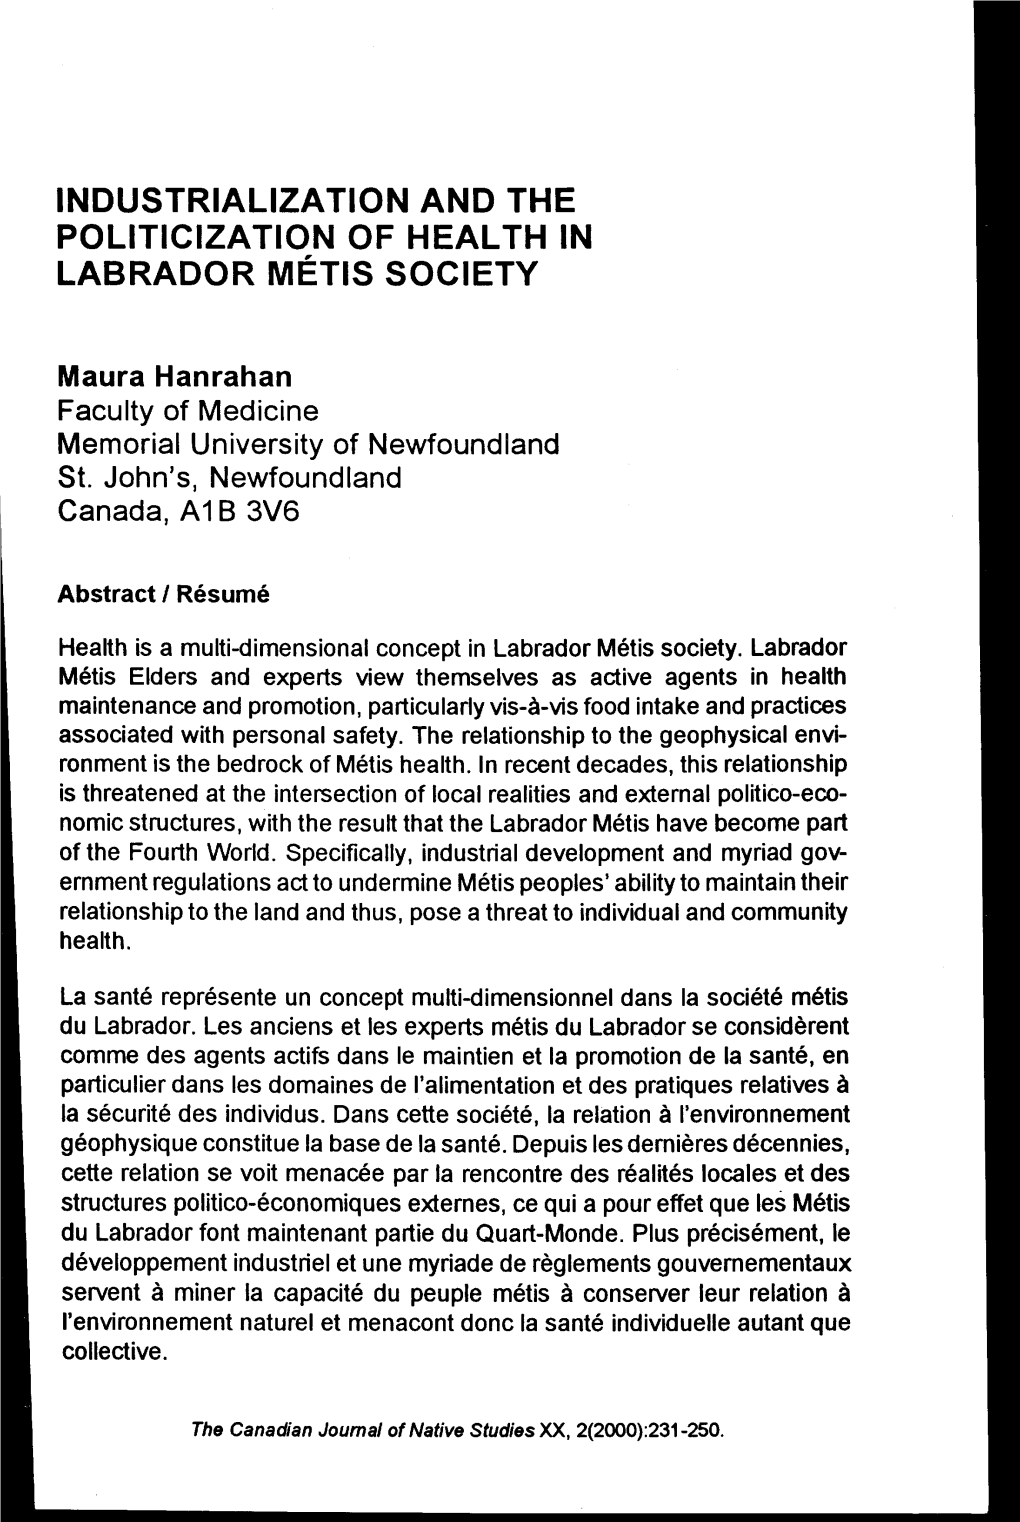 Industrialization and the Politicization of Health in Labrador Metis Society